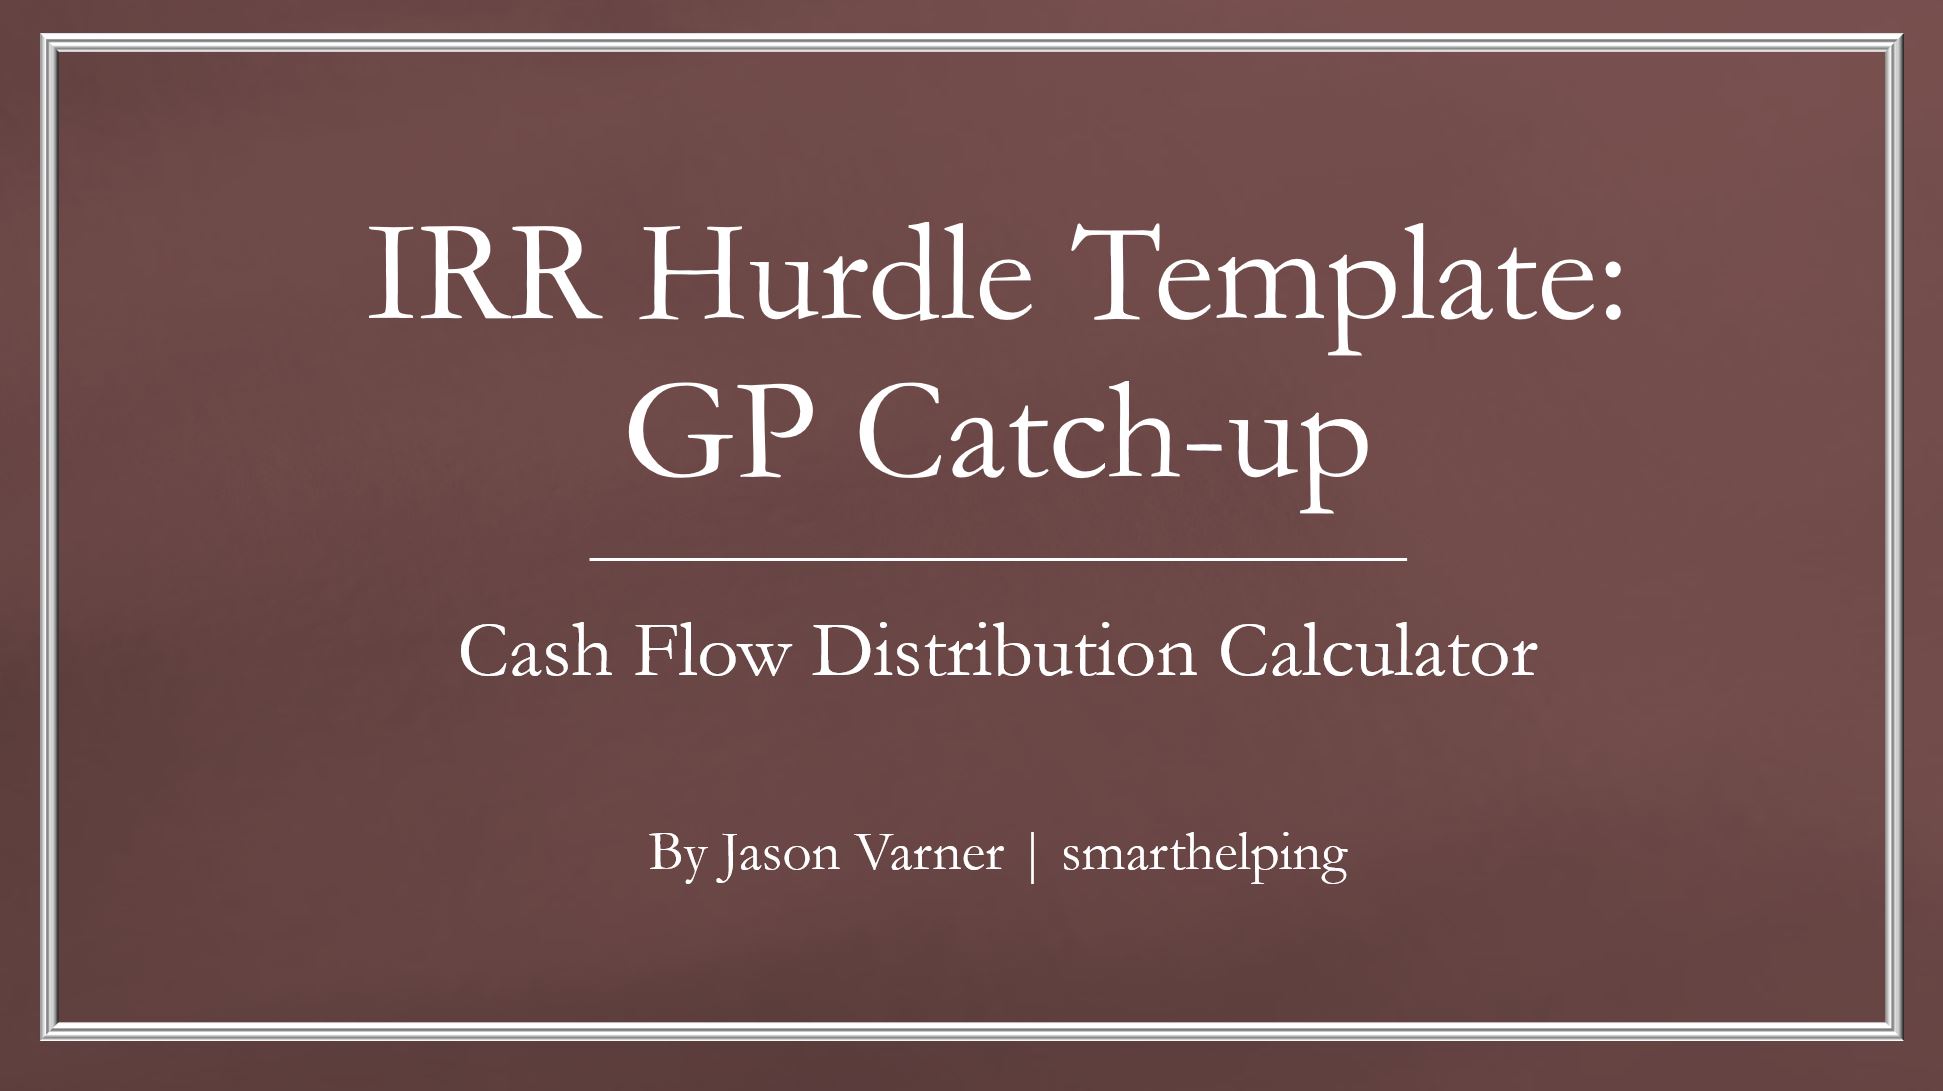 Joint Venture Waterfall: GP Catch-up Option (Excel template (XLSX)) Preview Image